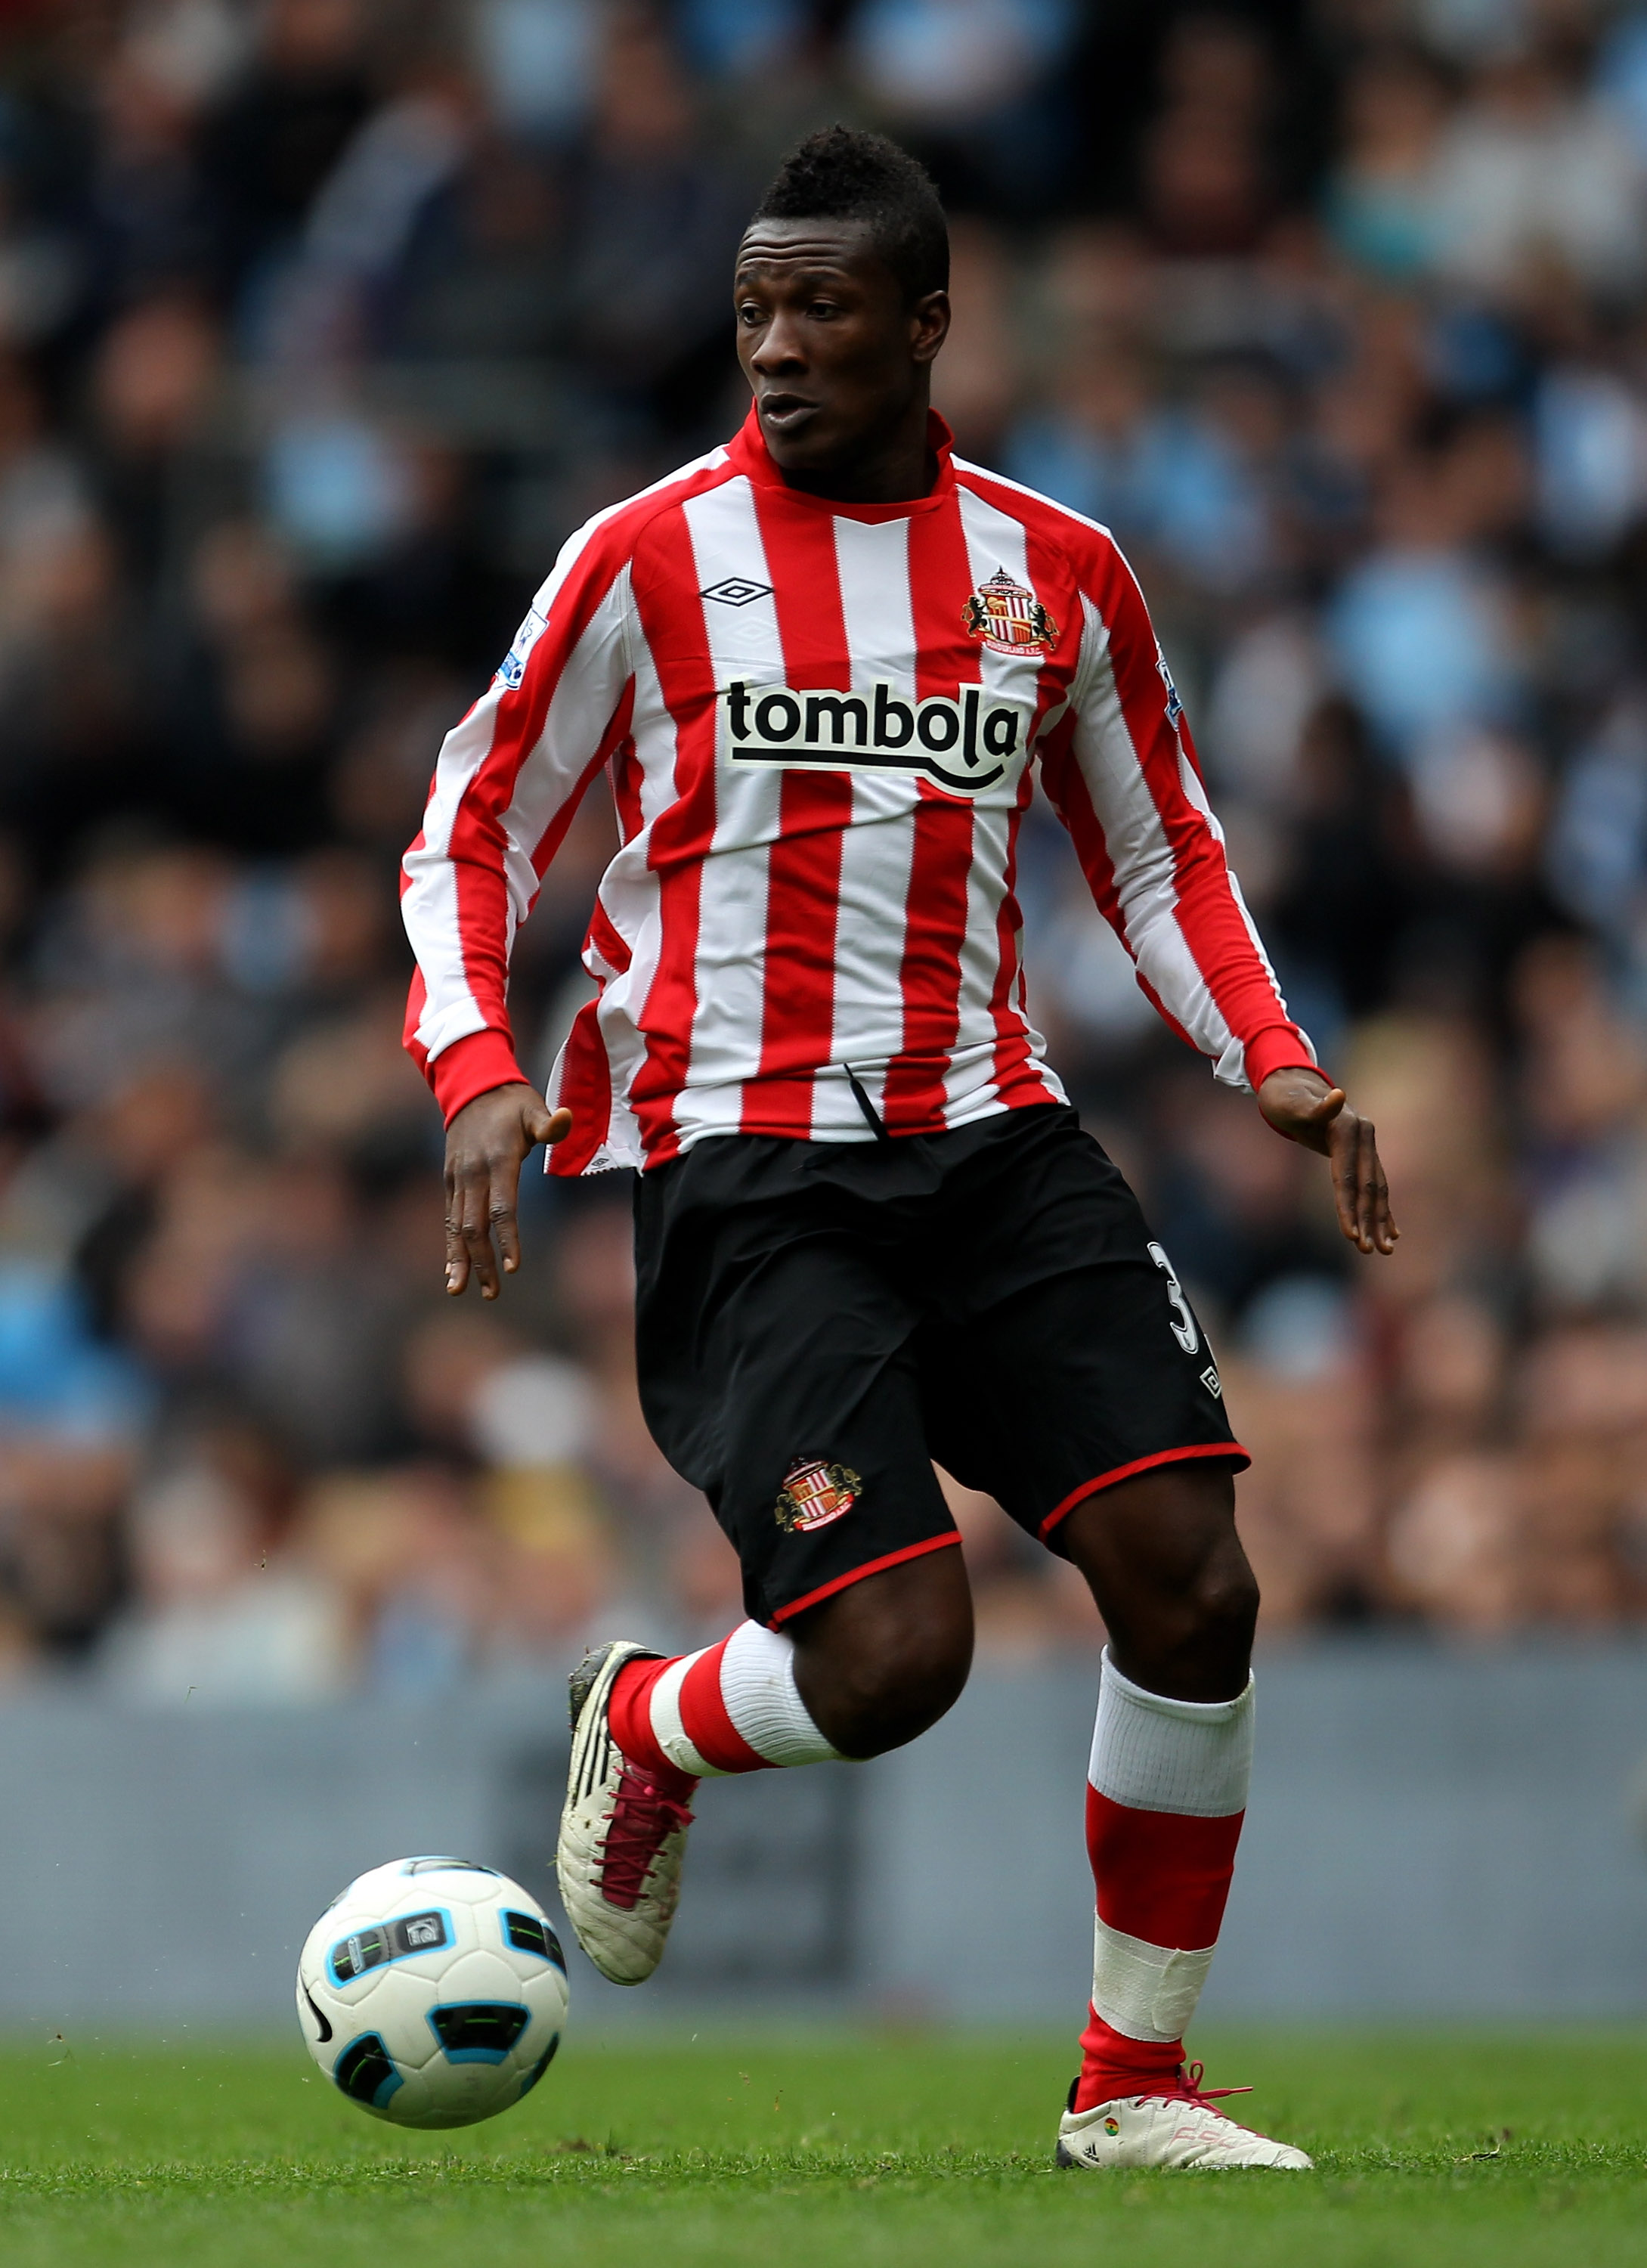 MANCHESTER, ENGLAND - APRIL 03:  Asamoah Gyan of Sunderland in action during the Barclays Premier League match between Manchester City and Sunderland at the City of Manchester Stadium on April 3, 2011 in Manchester, England.  (Photo by Alex Livesey/Getty